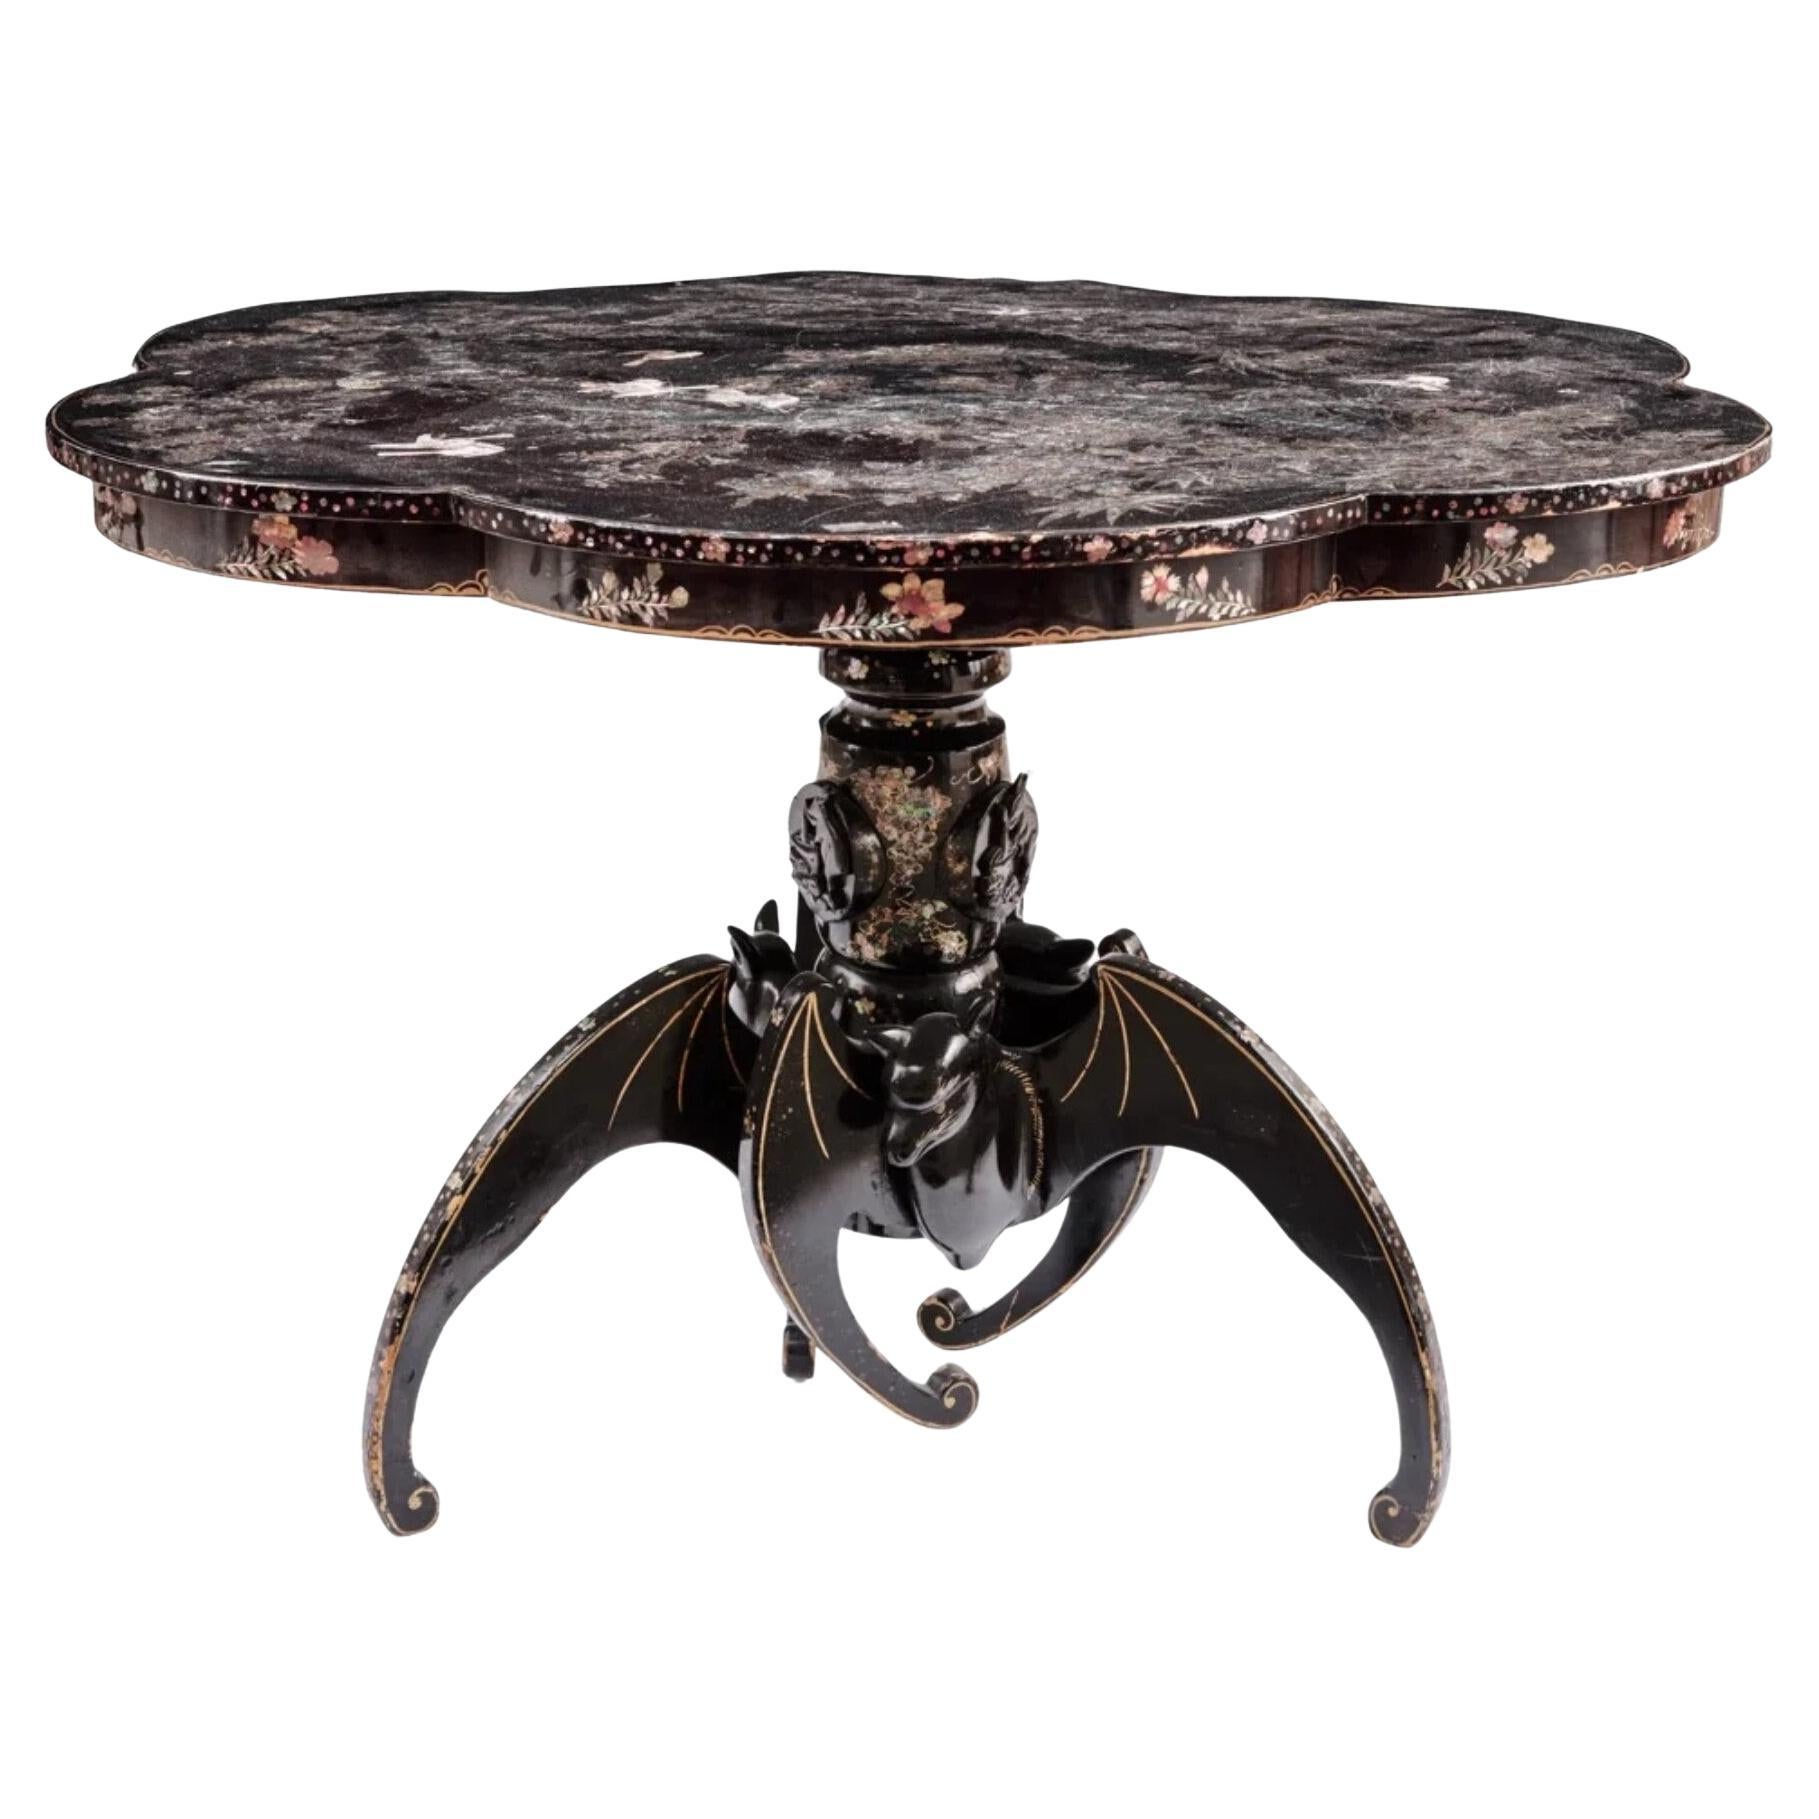 Mother-of-Pearl Black Lacquer Japanese Export Table with Feet Shaped as Bats